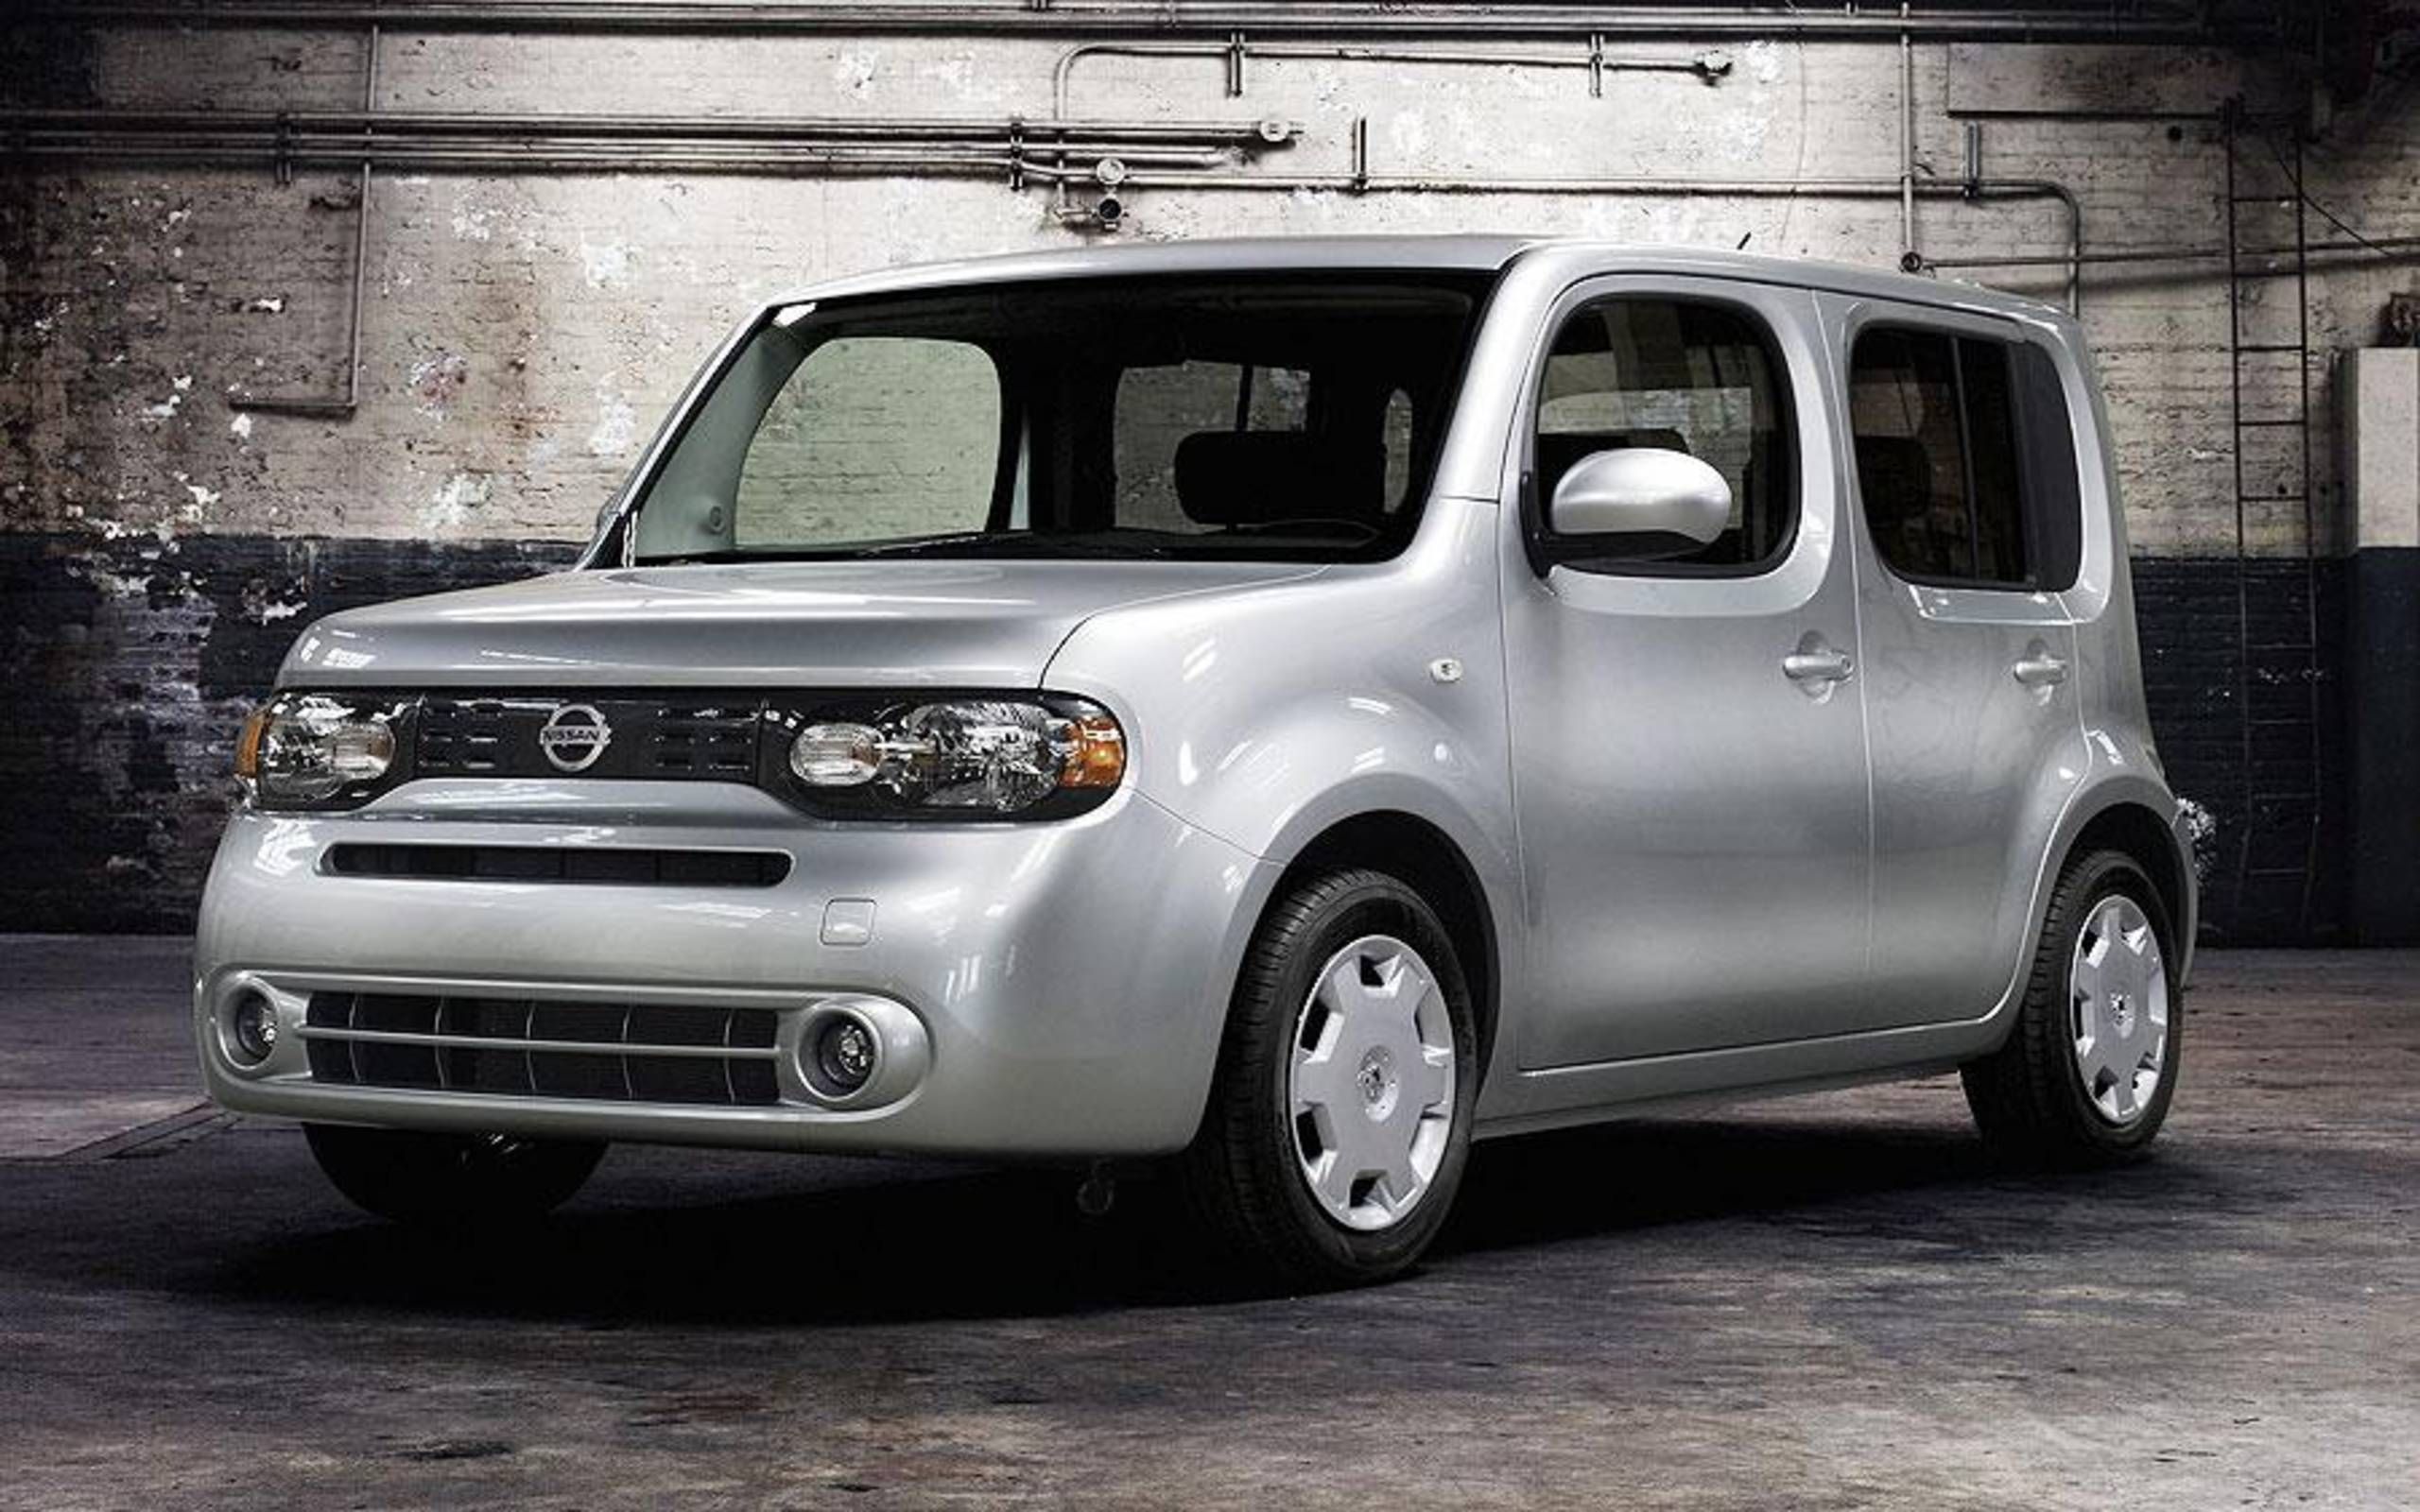 Nissan packages its Cube for U.S. delivery later this year